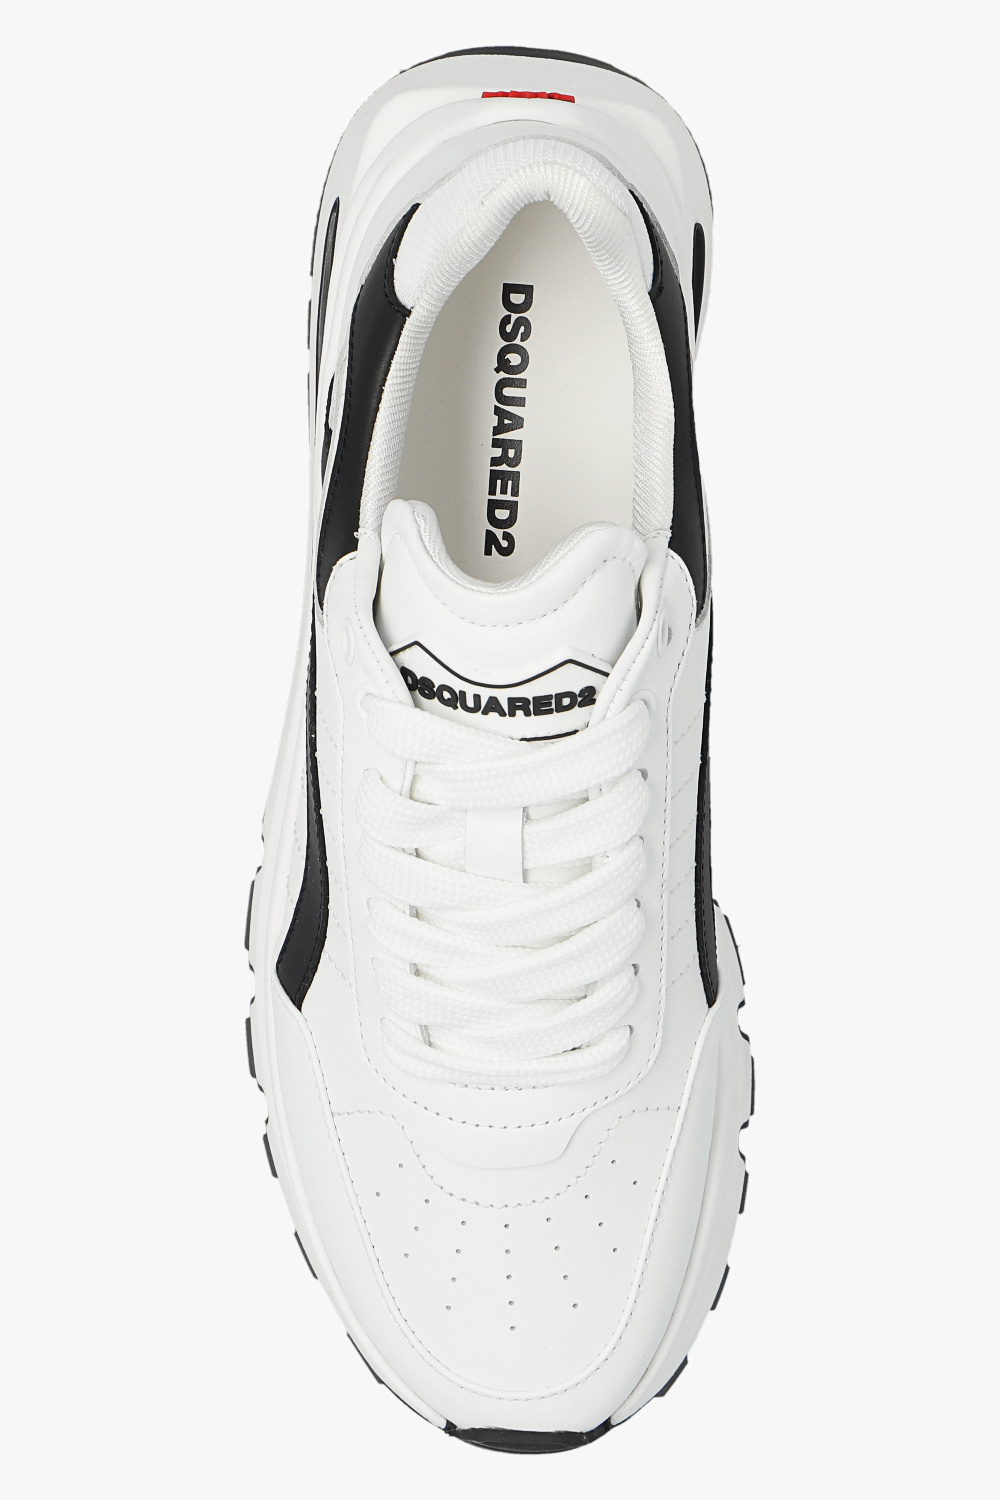 Dsquared2 Runds2 Low-top Sneakers - Black